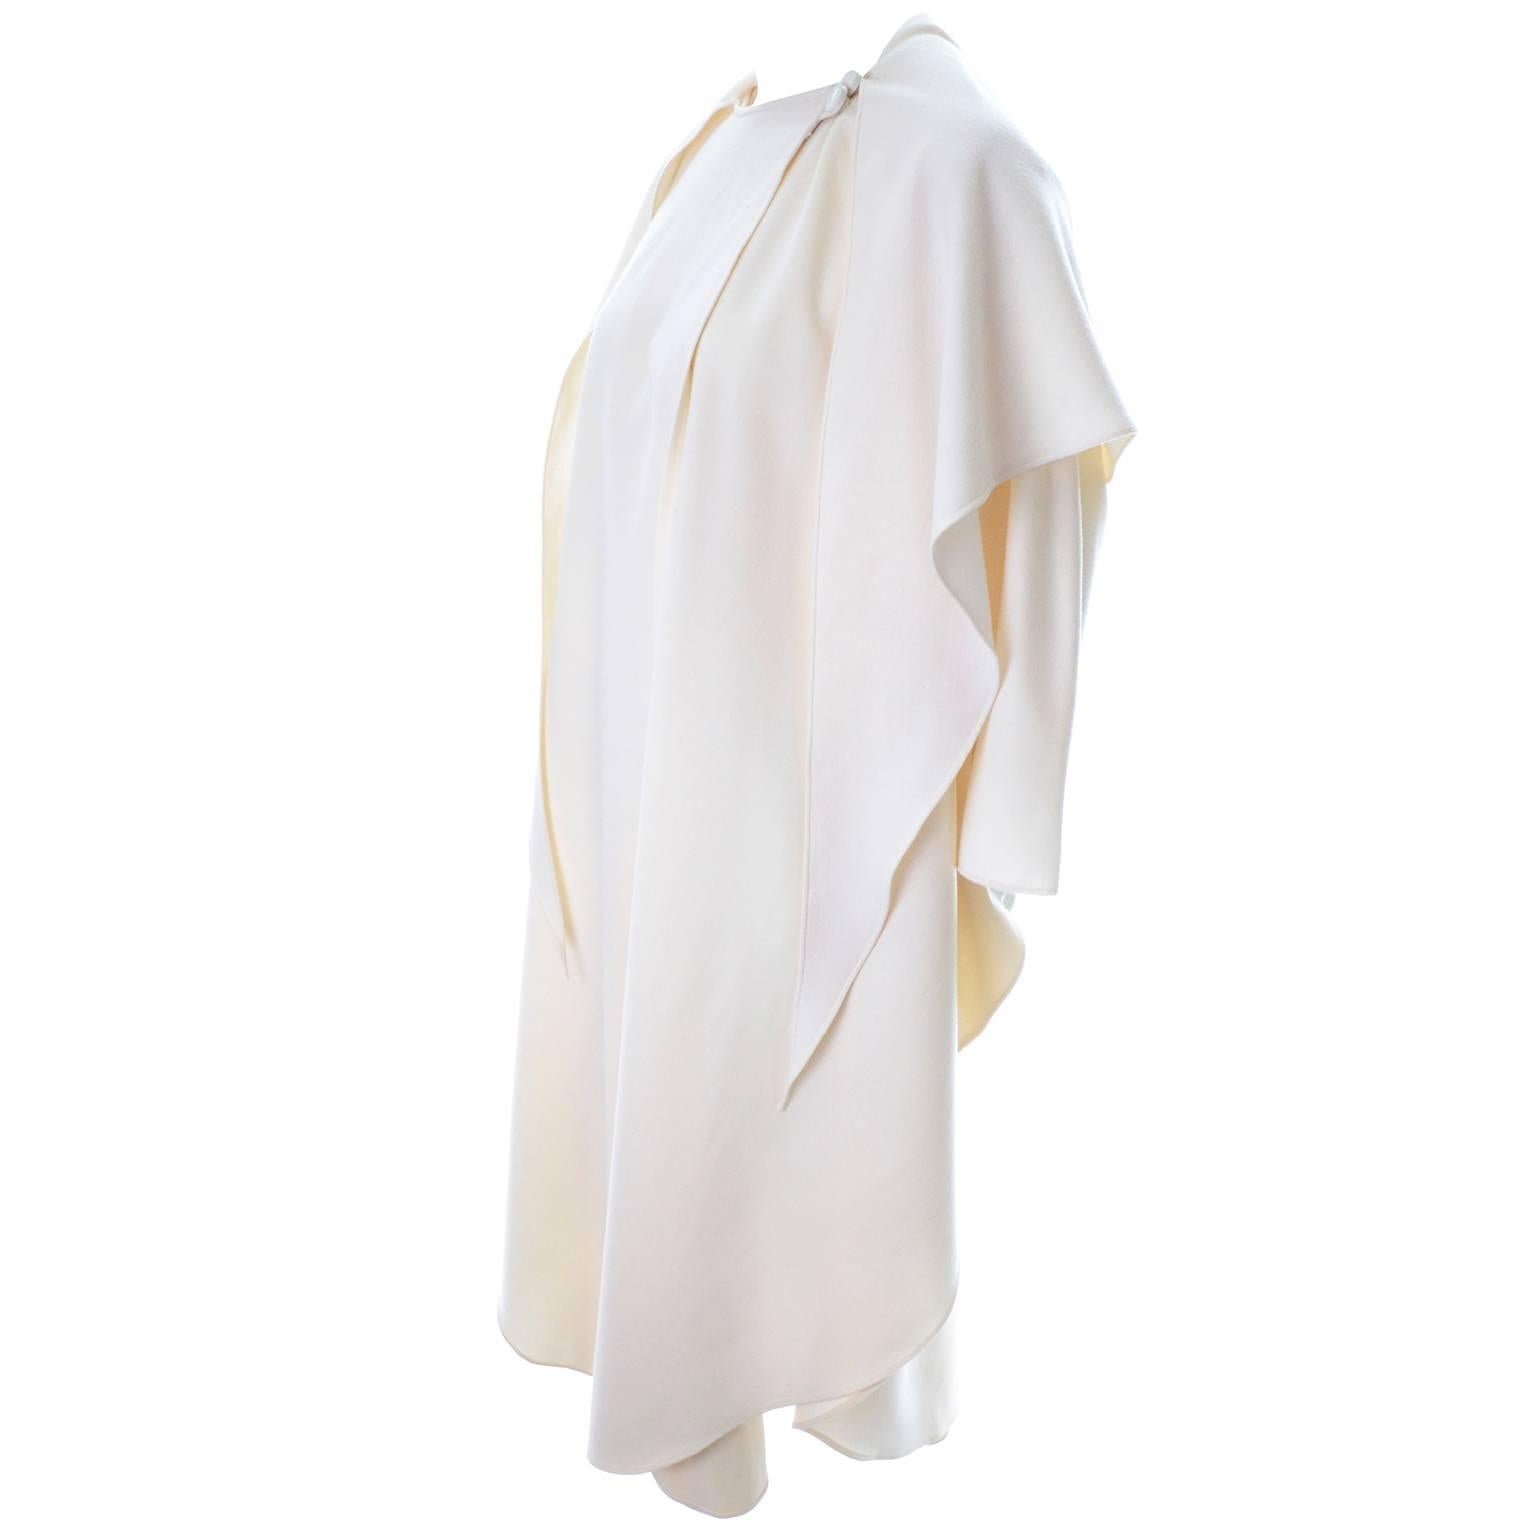 Women's Winter White Wool Designer Yeohlee Hooded Cape Cloak One Size As New